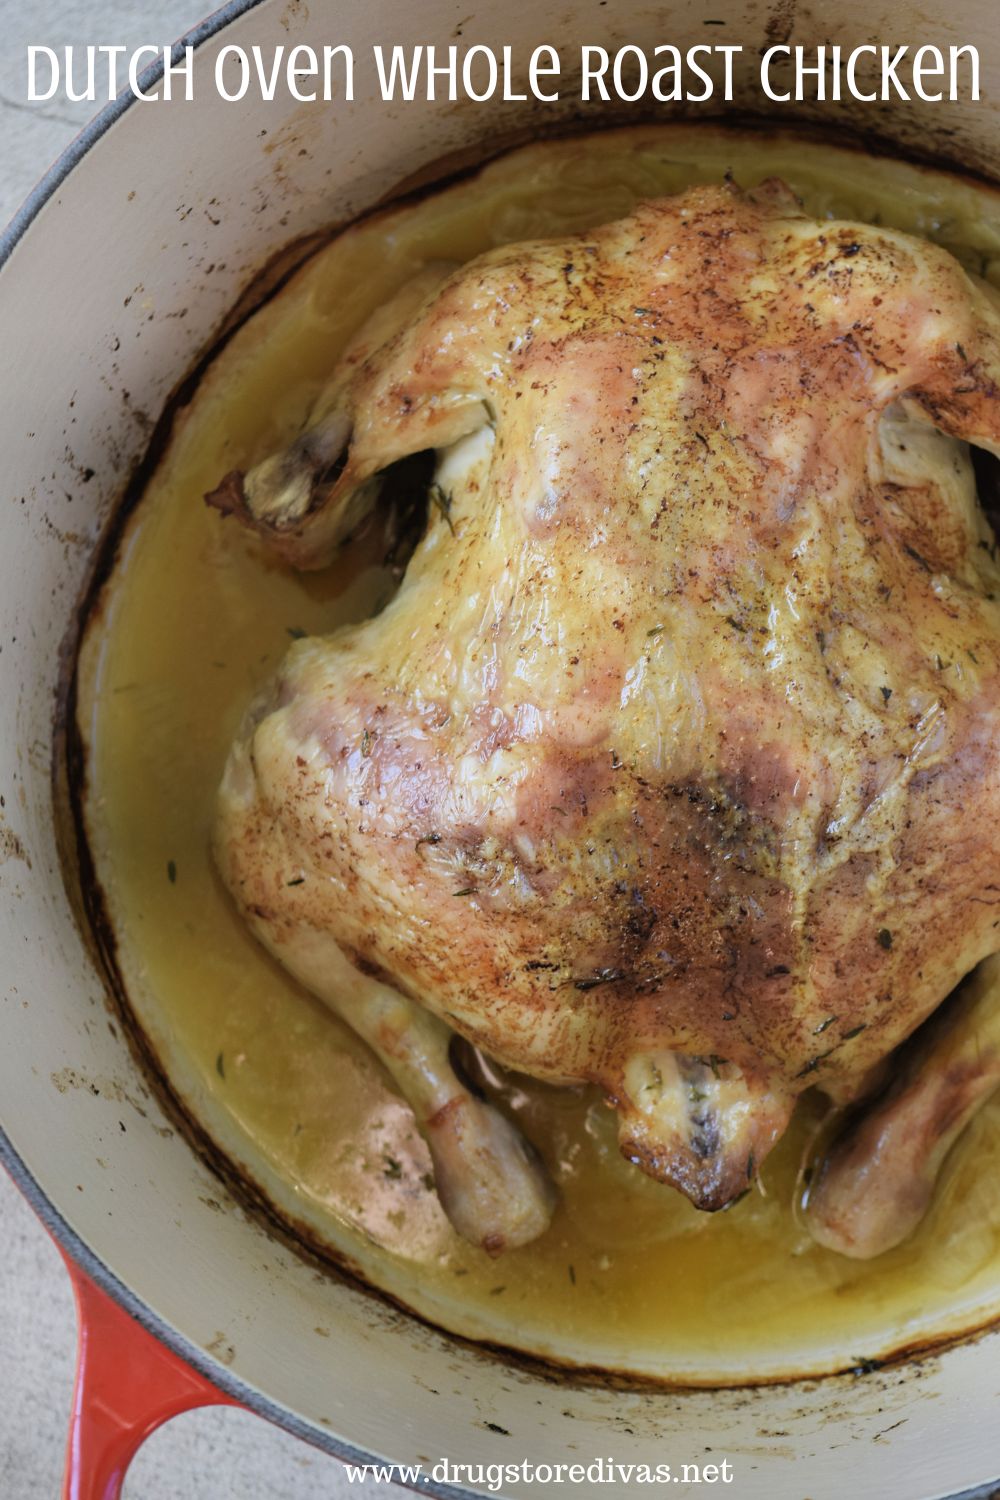 A whole cooked chicken in a Dutch oven with the words 